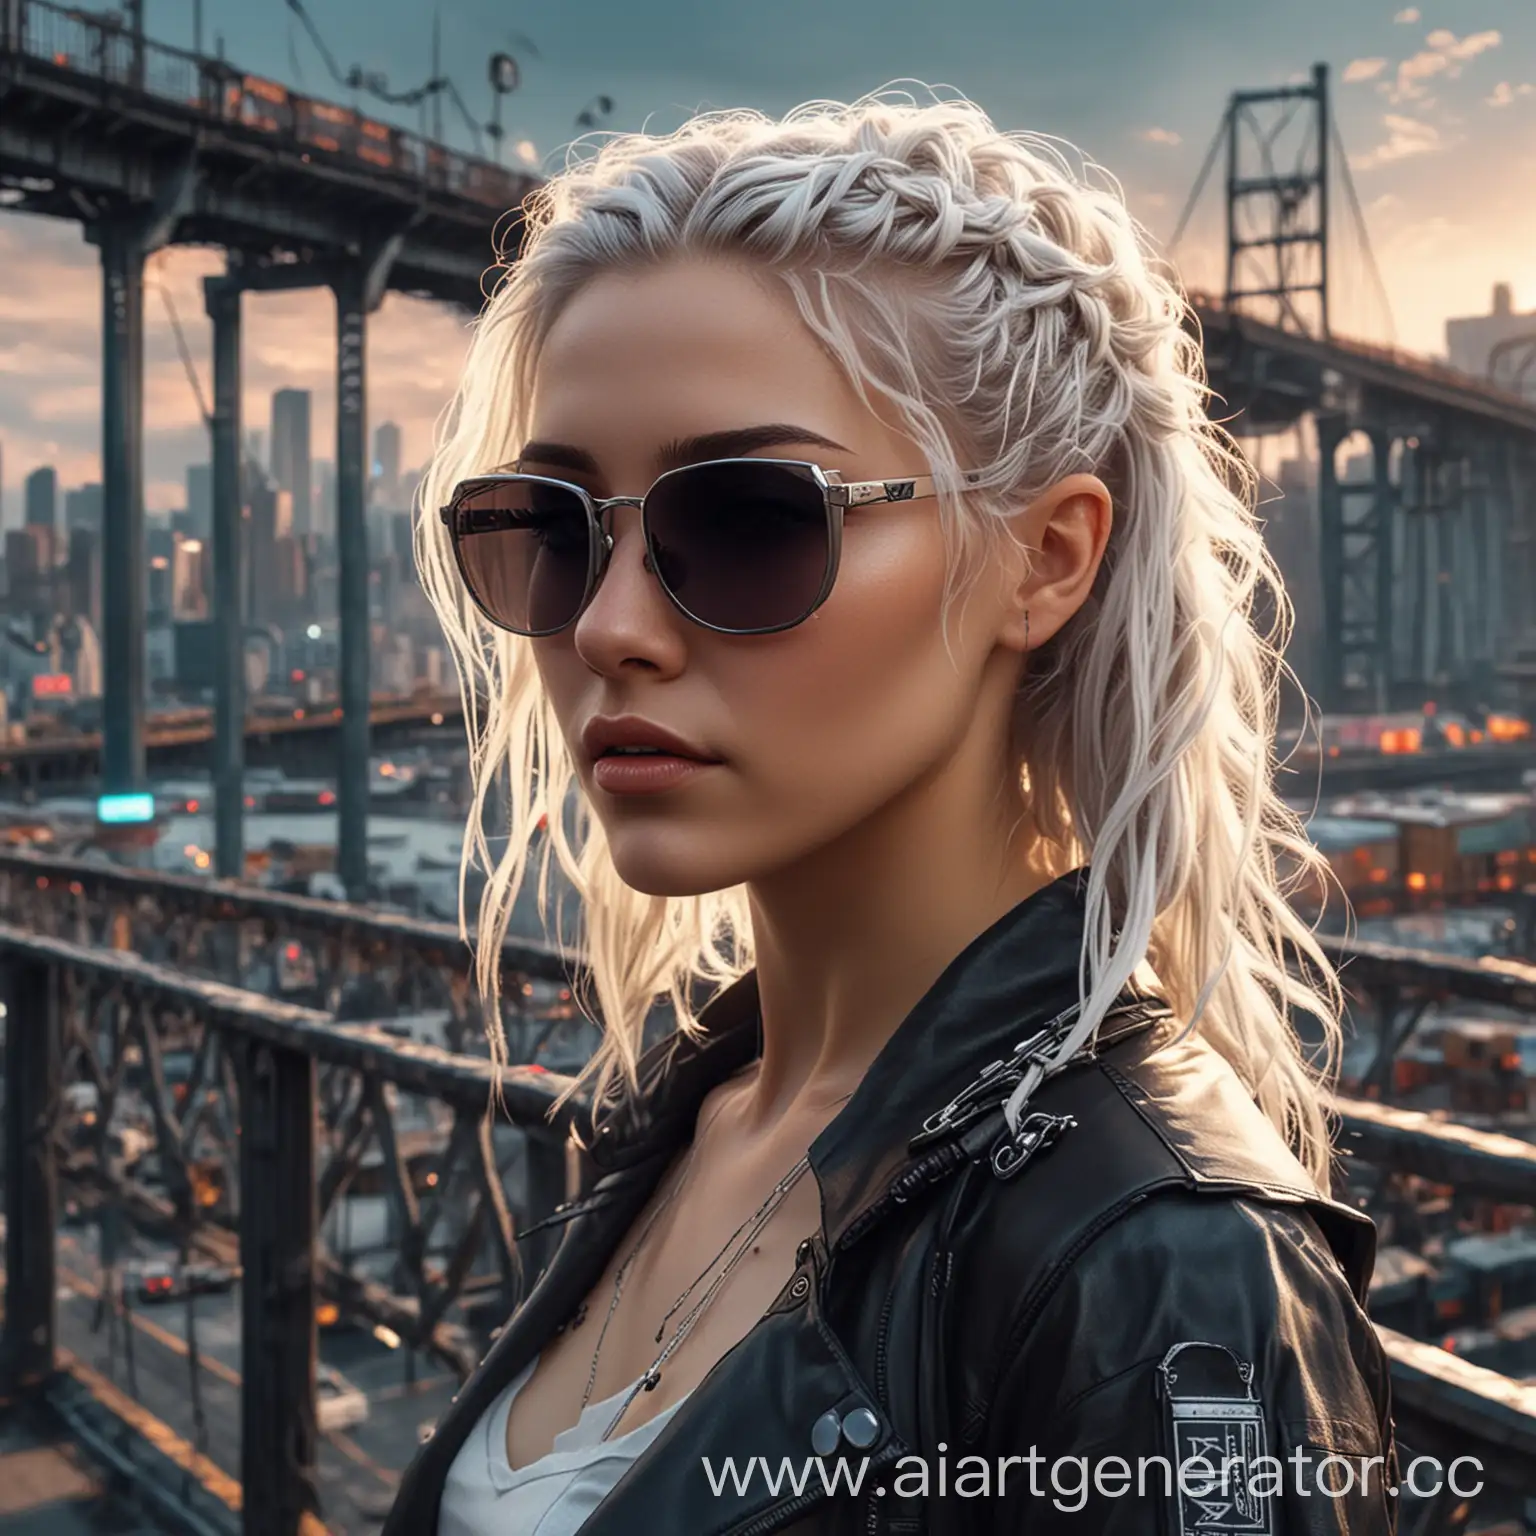 Futuristic-Celebration-Cyberpunk-Woman-with-White-Braided-Hair-and-Sunglasses-in-Cityscape